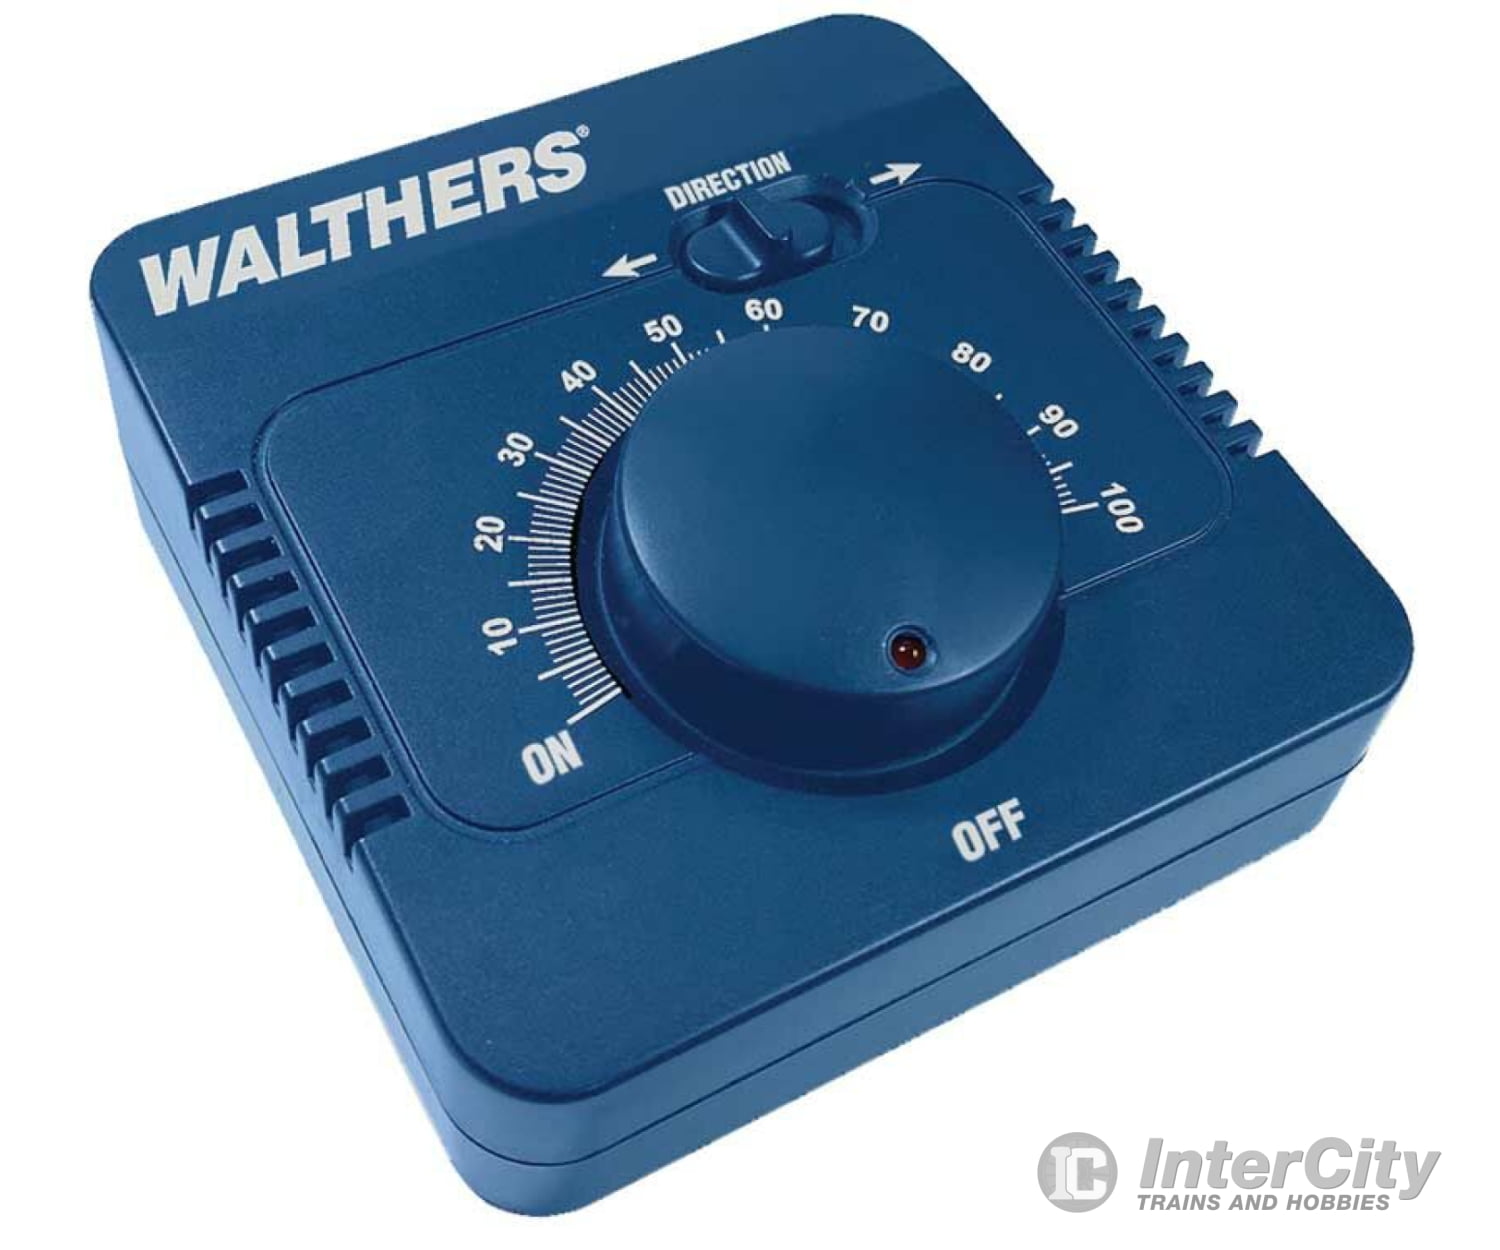 Walthers 4000 Dc Train Controller -- 2 Amps Up To 24 Volt-Amphere 16-Volt Accessory Output Analog